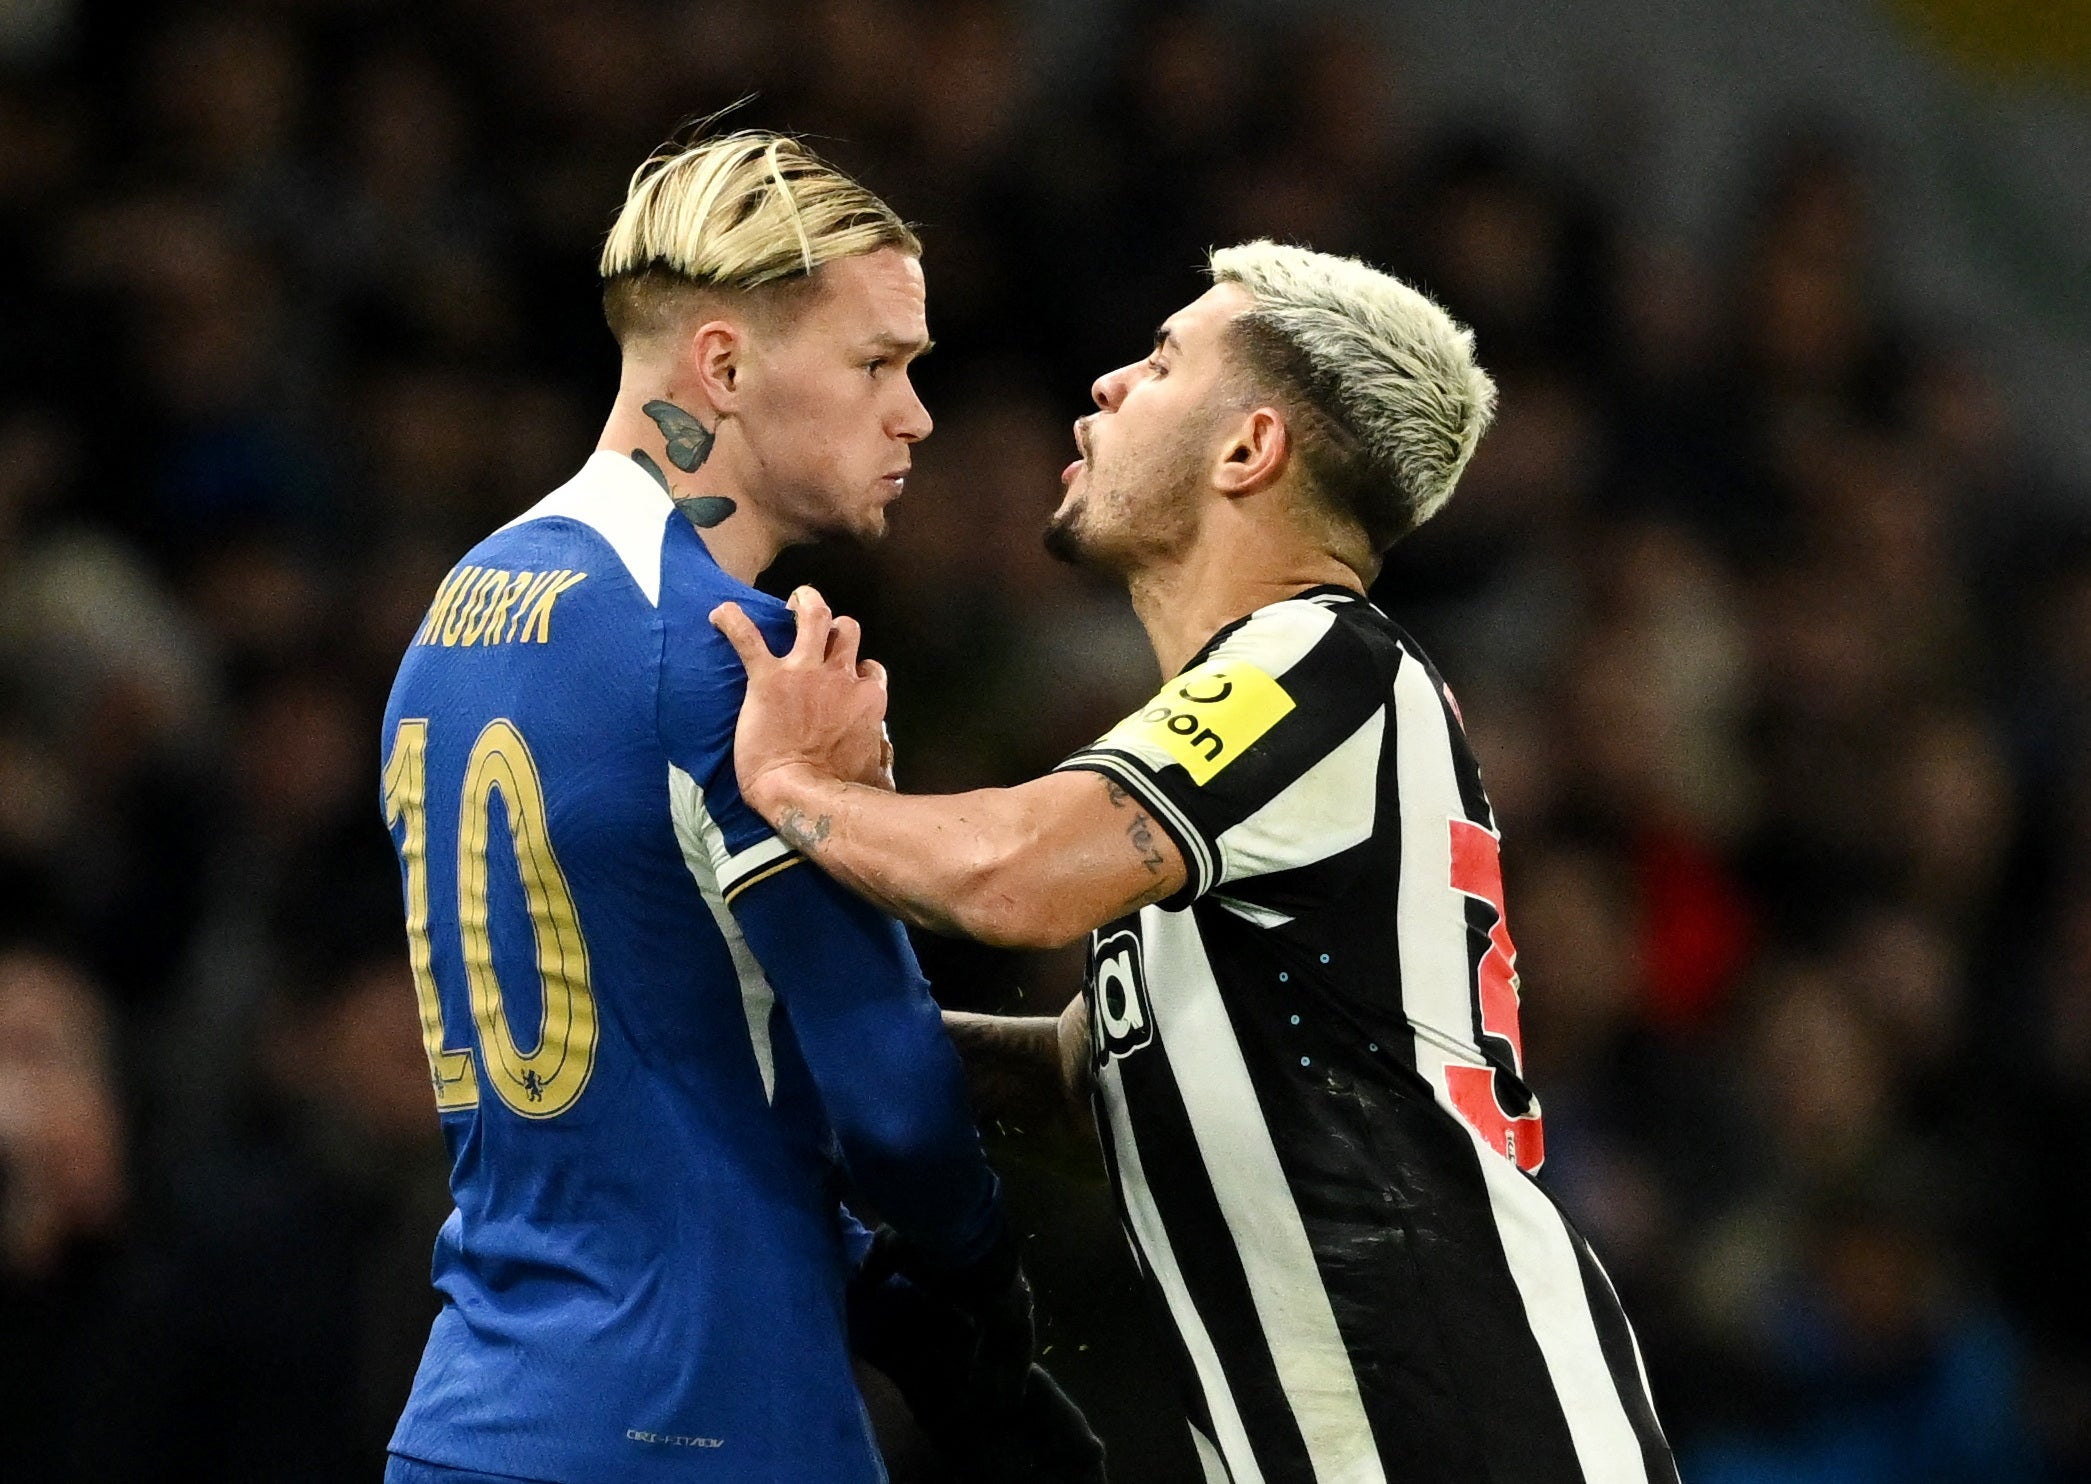 Chelsea and Newcastle played out a hard-fought quarter-final that meant a lot to both teams